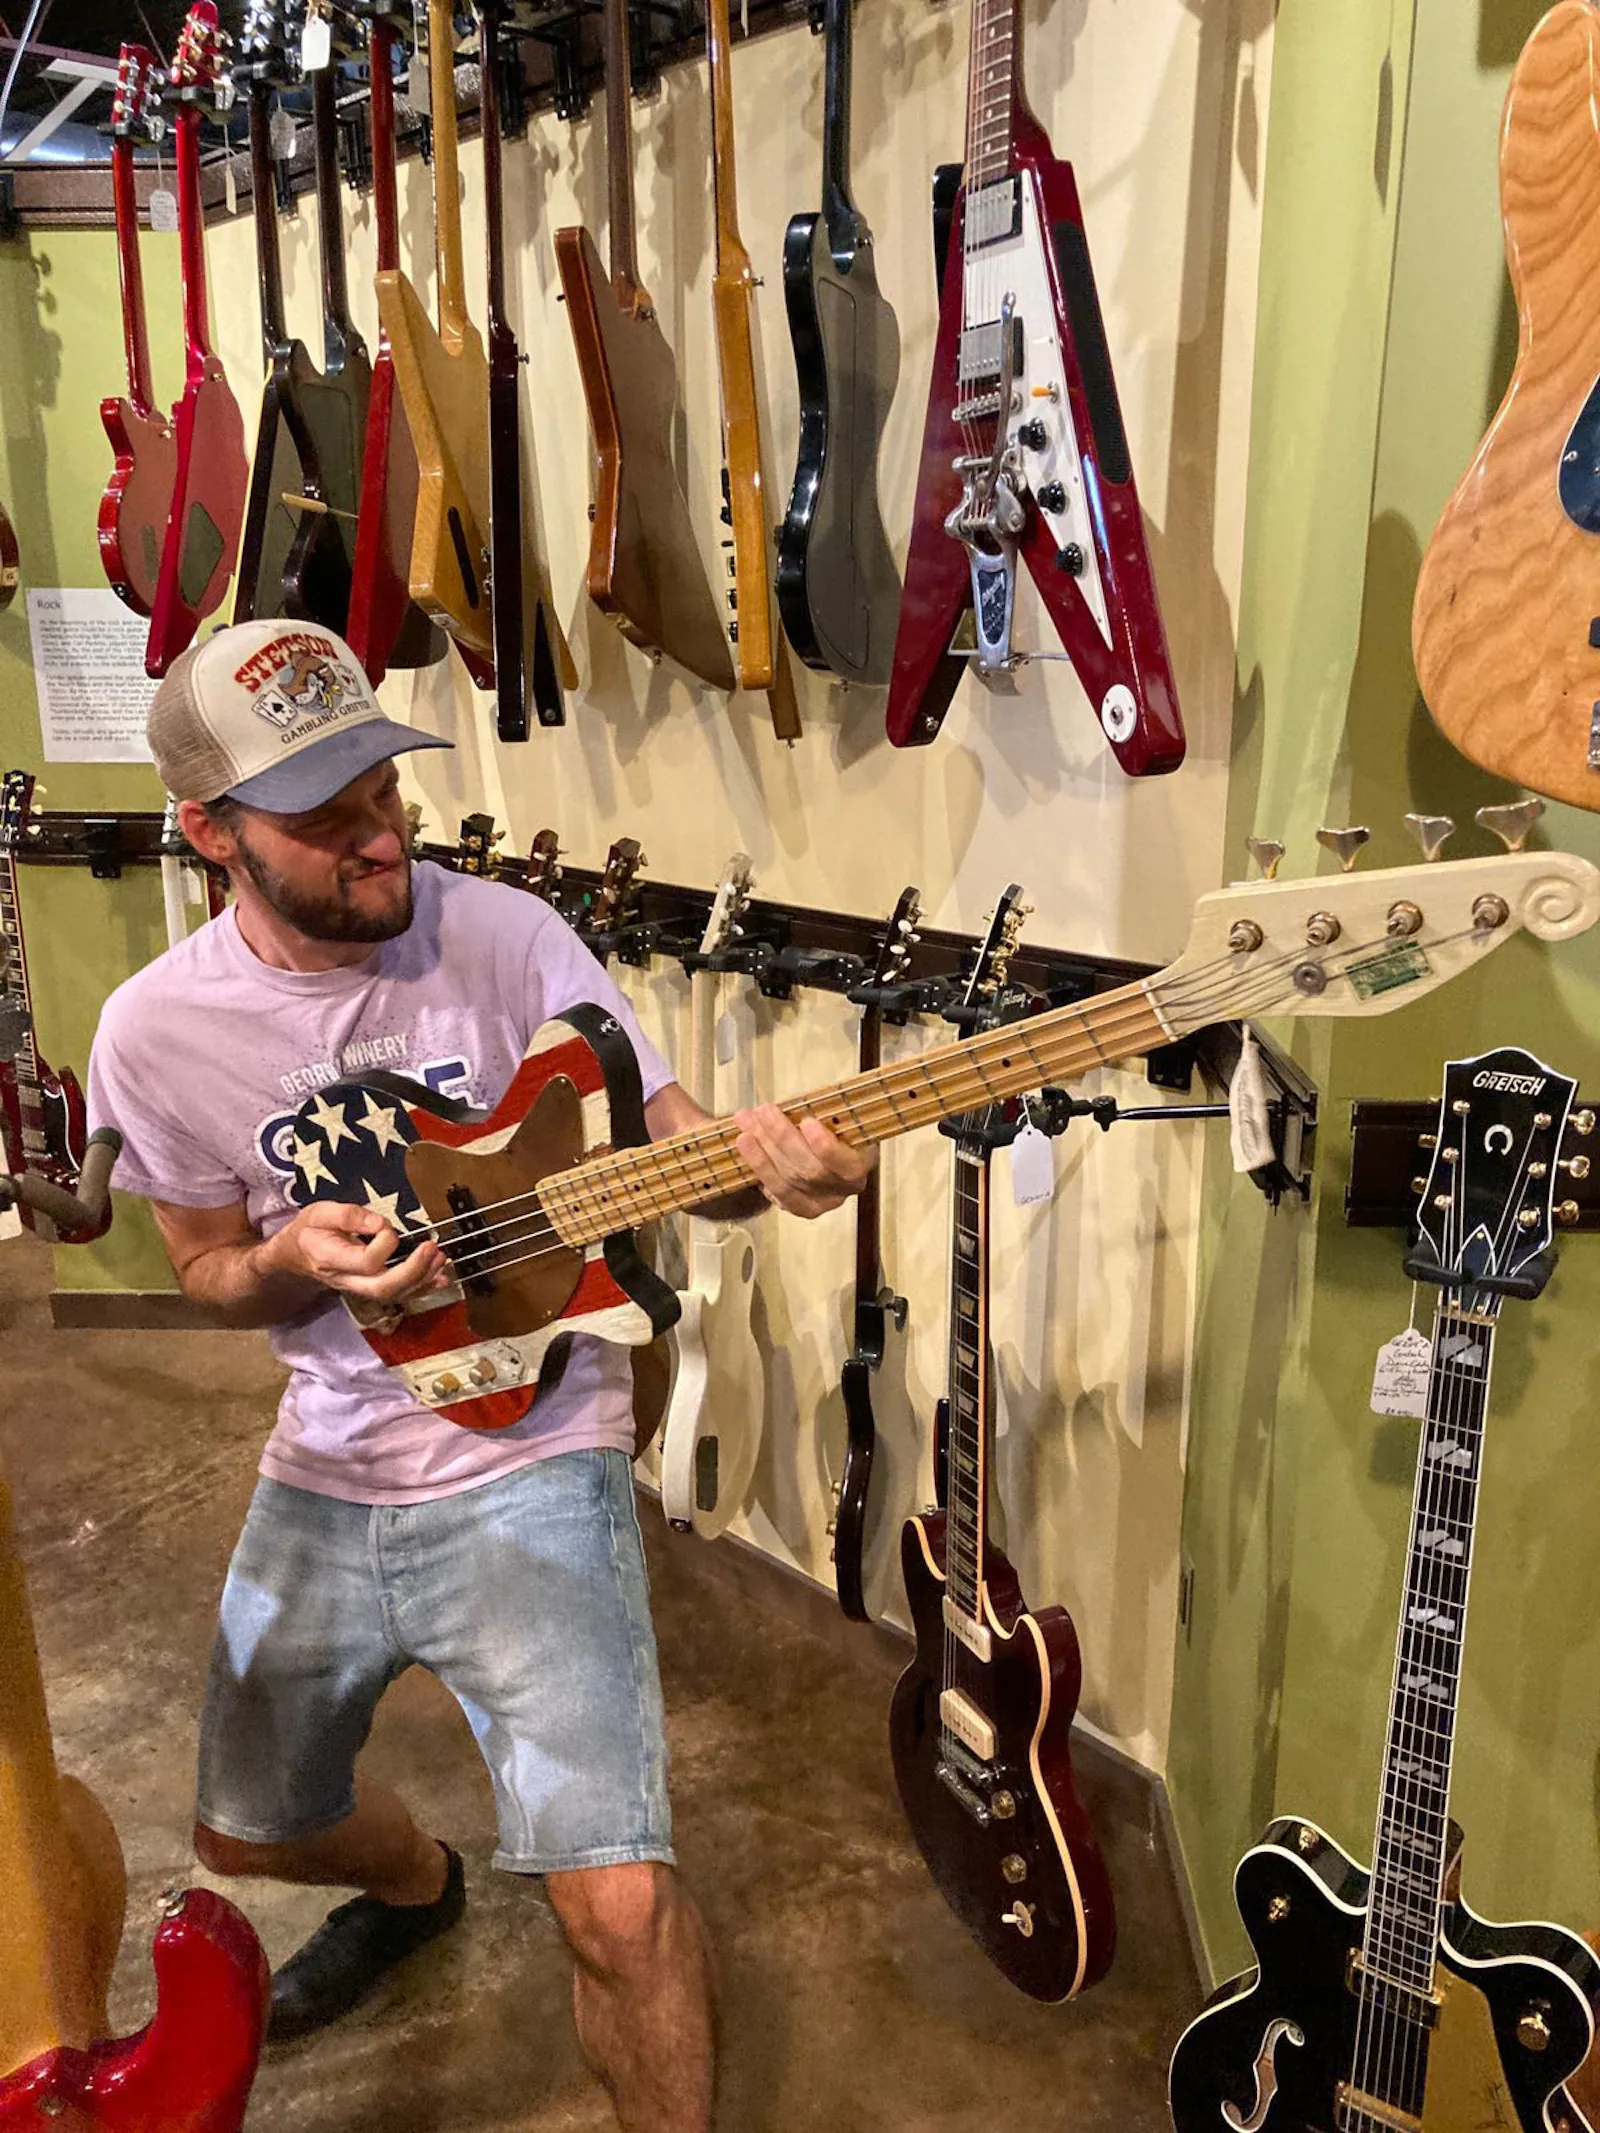 Someone is extremely happy with American prices of guitars...